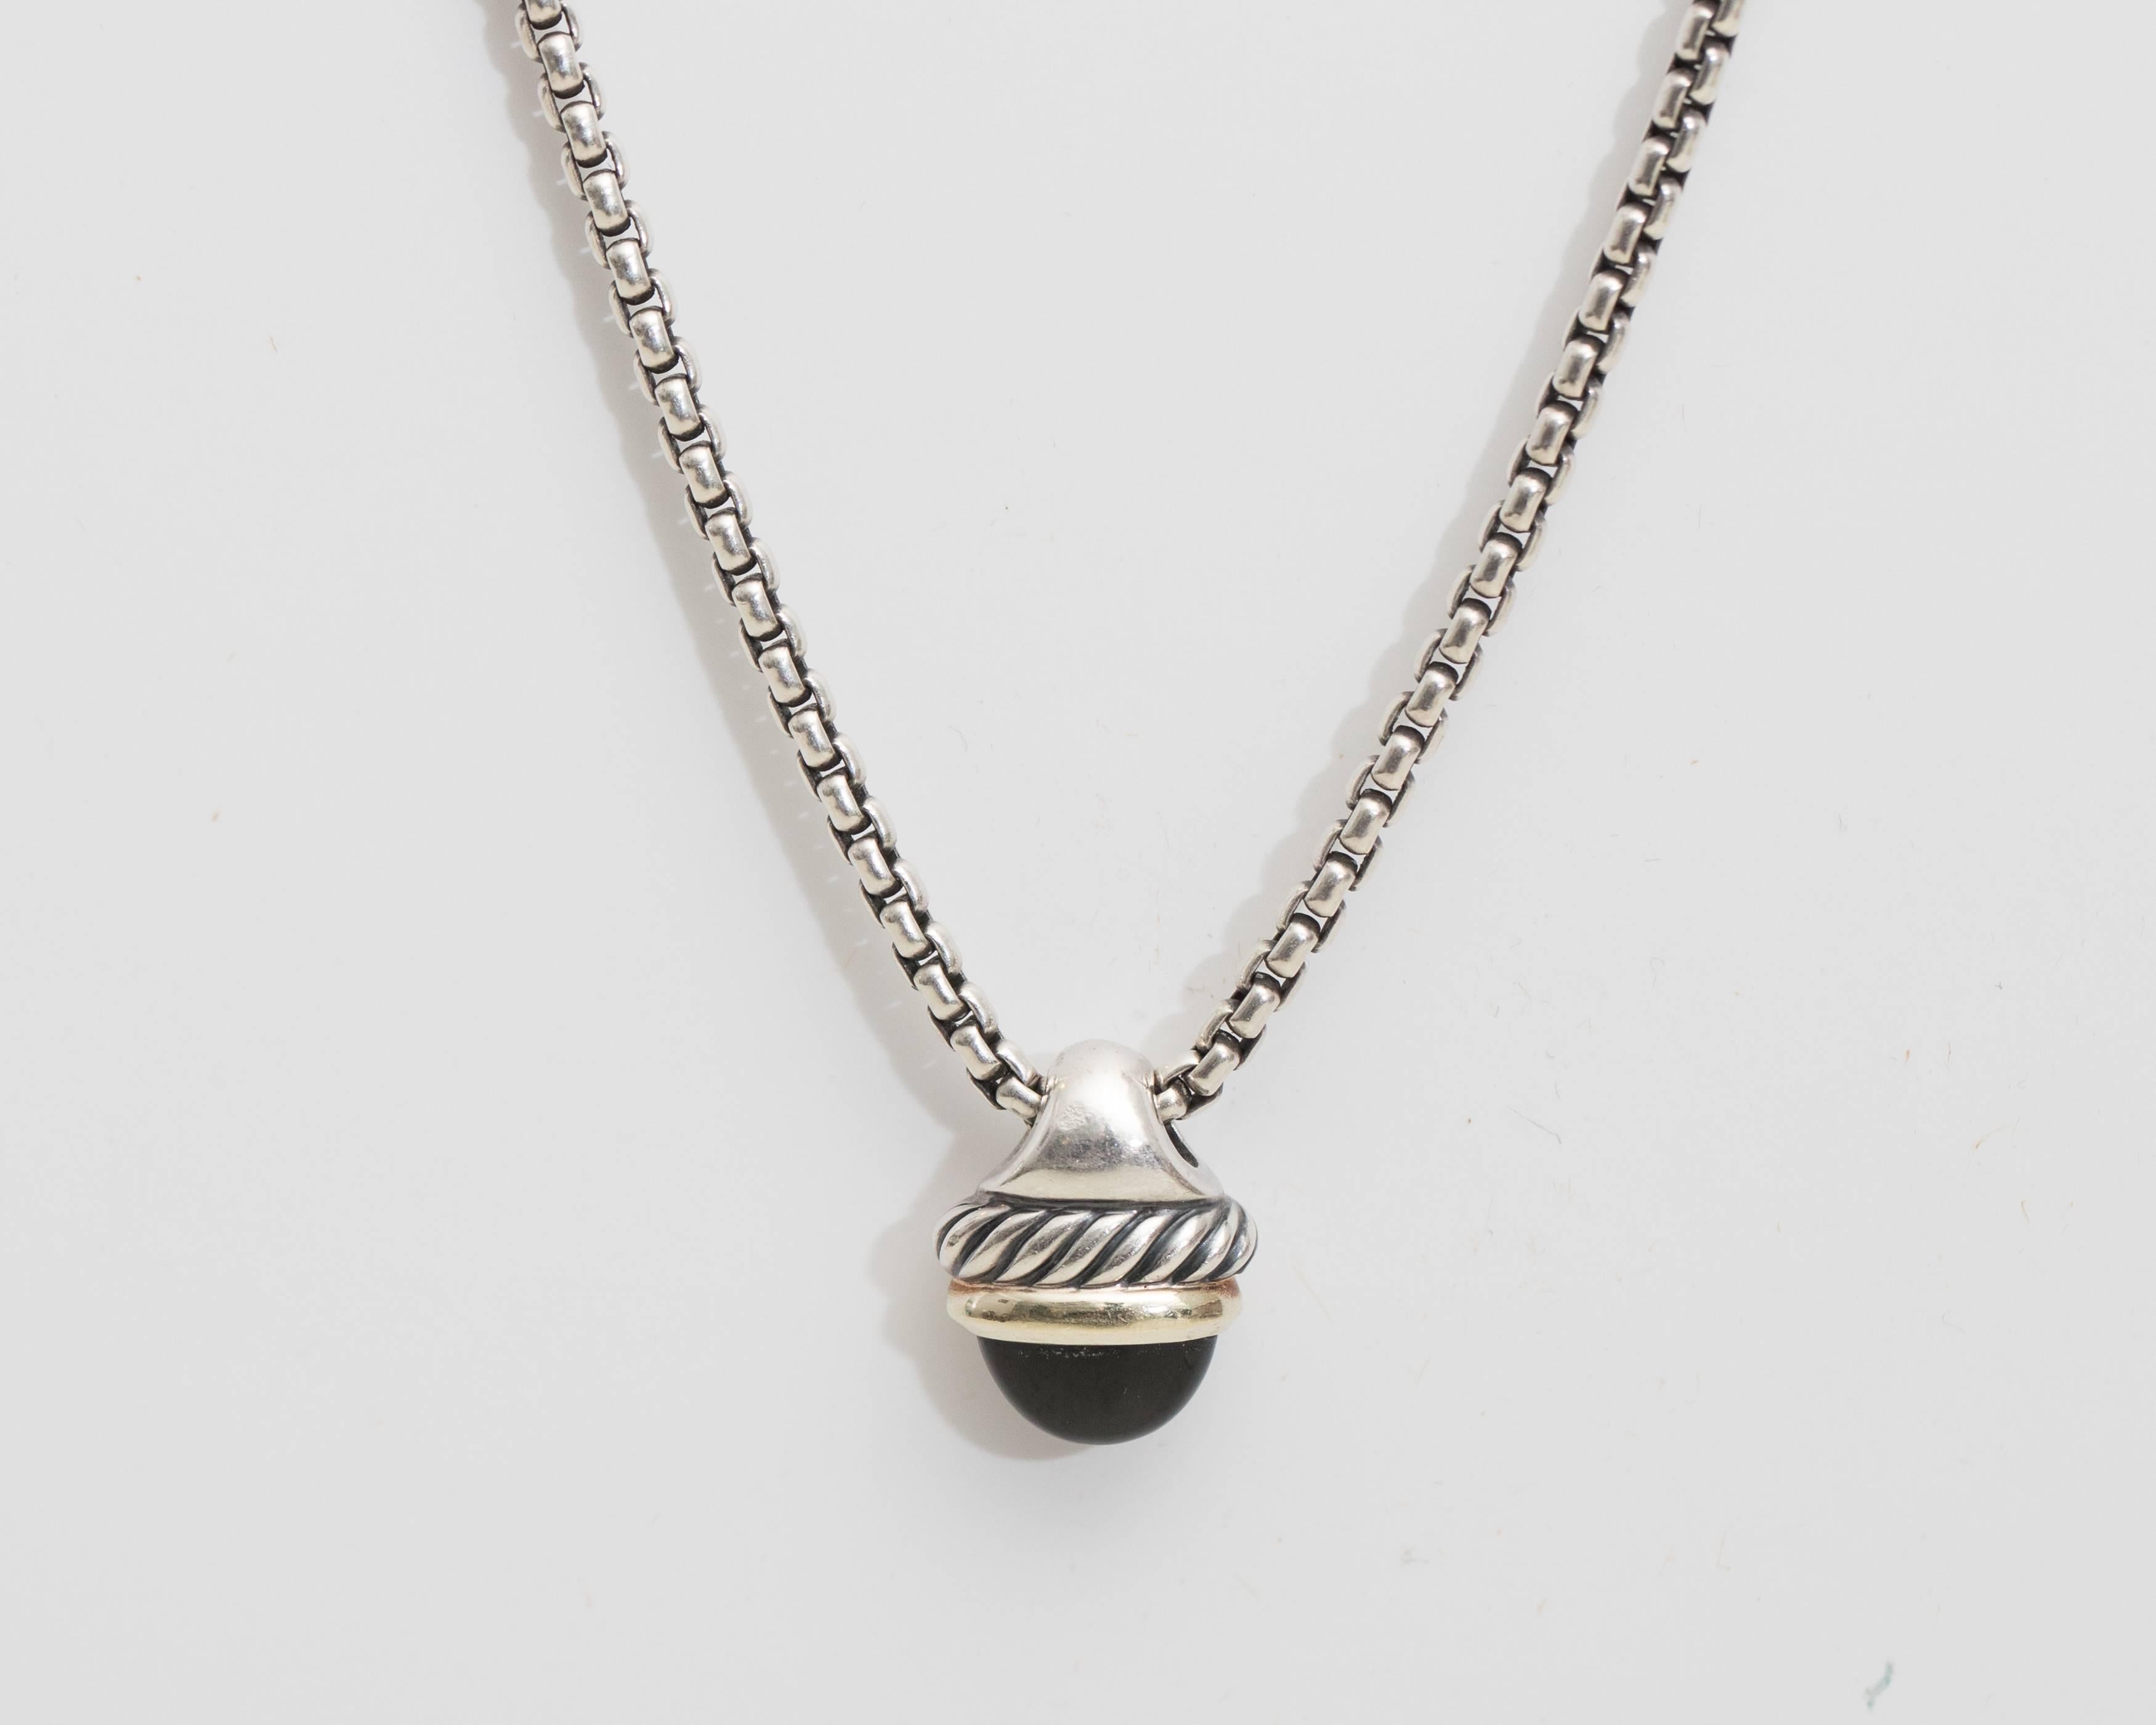 David Yurman Cable Pendant Necklace - Sterling Silver, 18 Karat Yellow Gold, Onyx

Features a rounded Box Chain, two tone Pendant with Classic Cable design and Black Onyx Cabochon. The pendant has a broad Sterling Silver bail supported by a Sterling